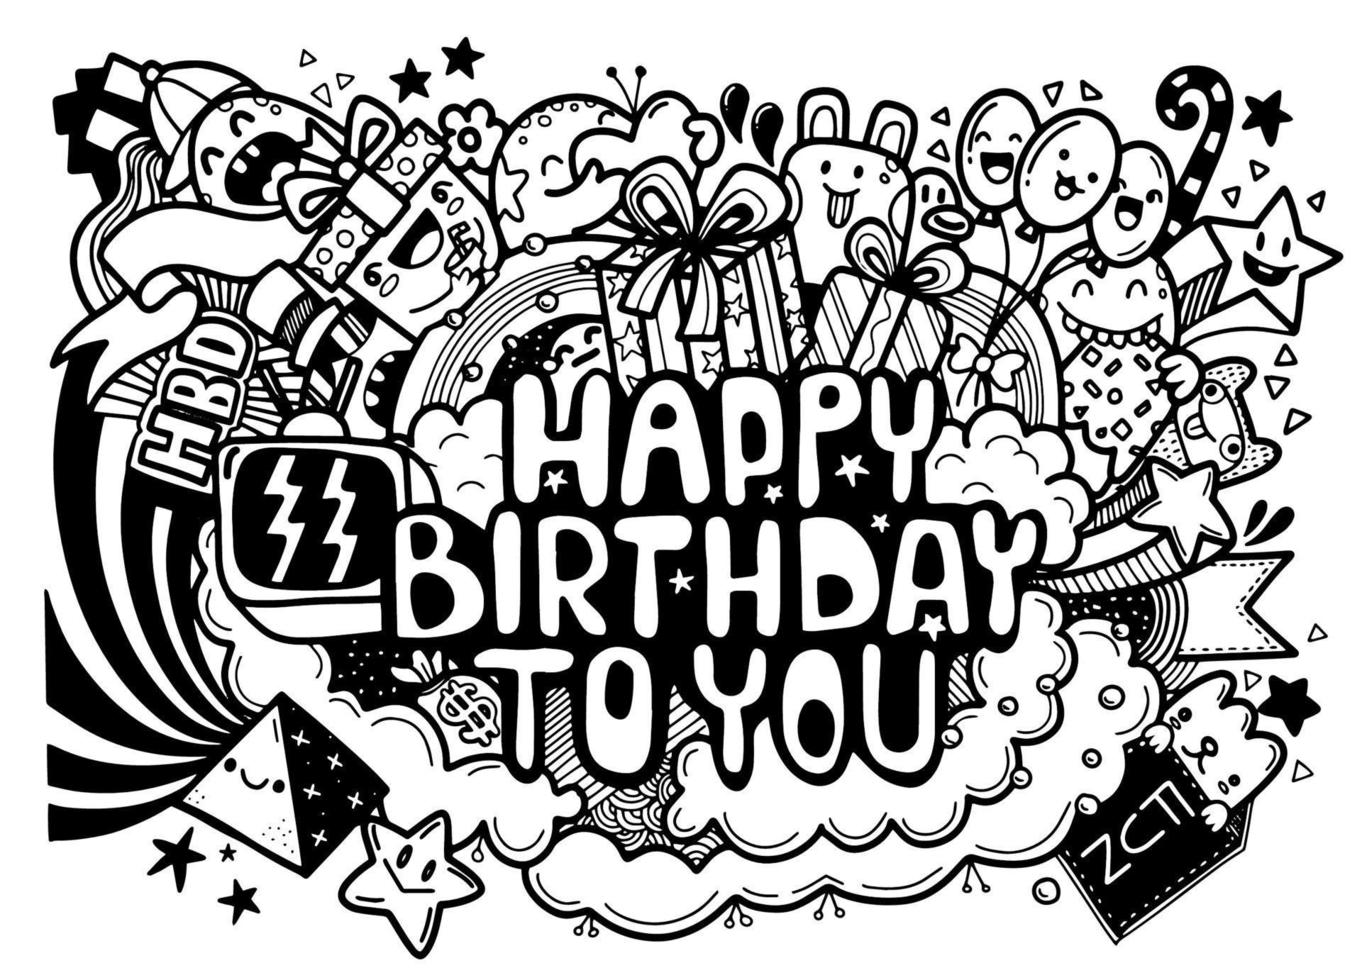 Doodle Birthday party background , cute style vector